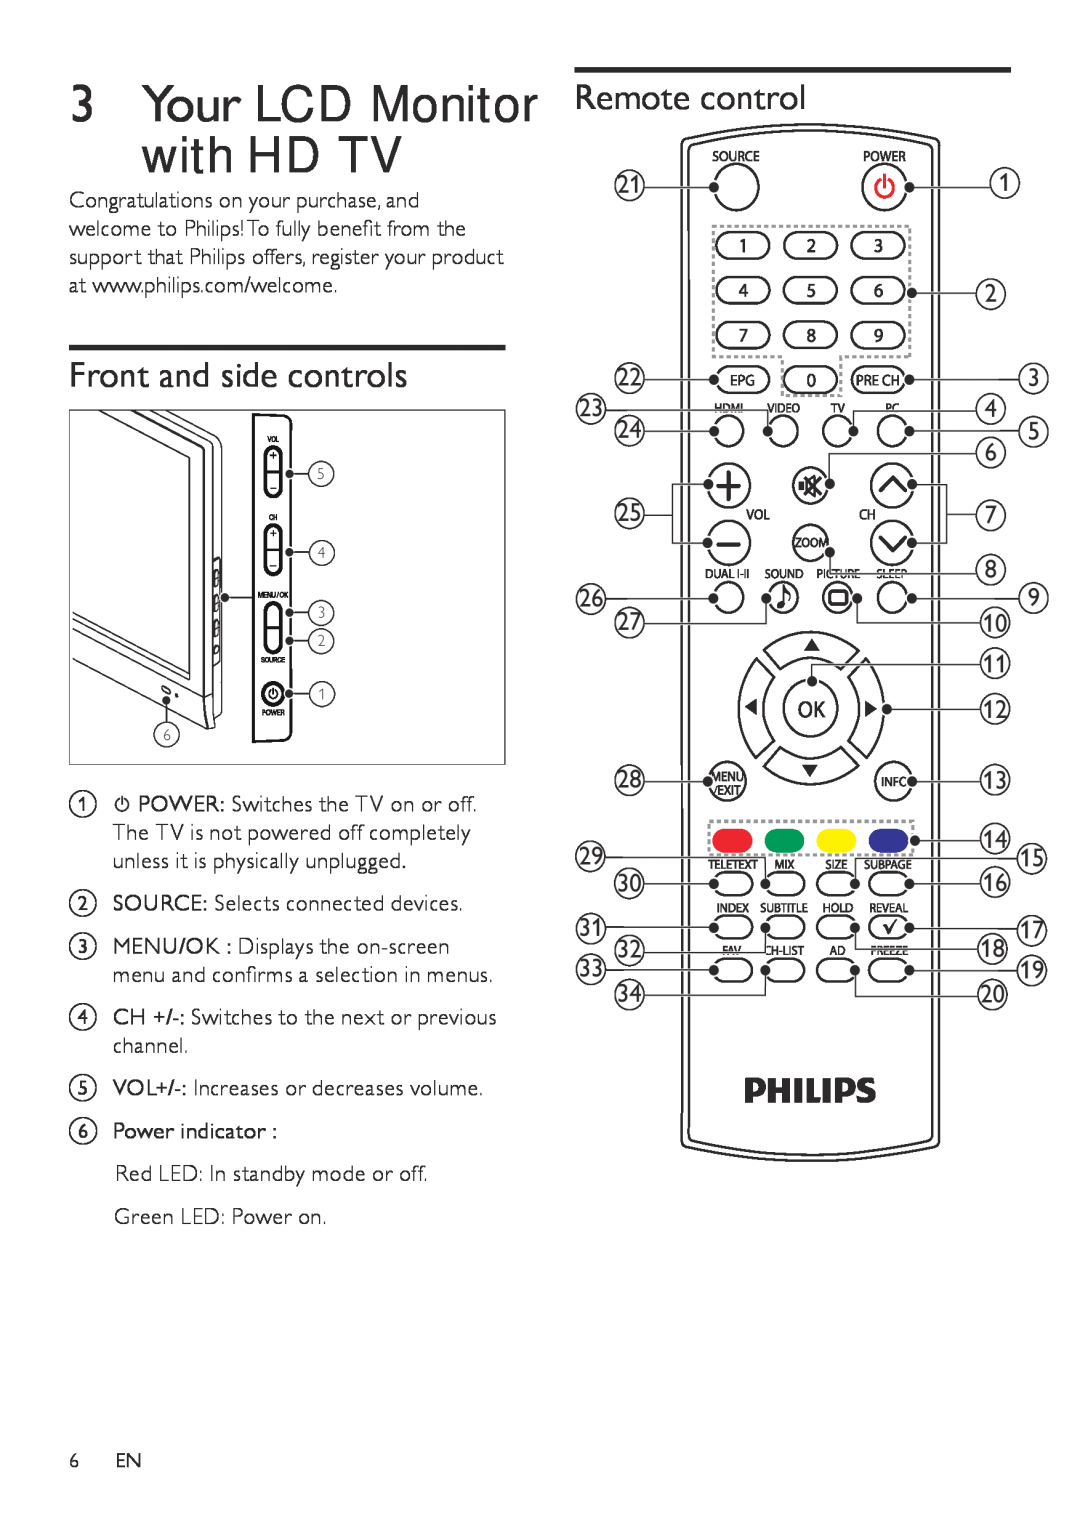 Philips 201T1 user manual Remote control, Front and side controls, 3Your LCD Monitor with HD TV 